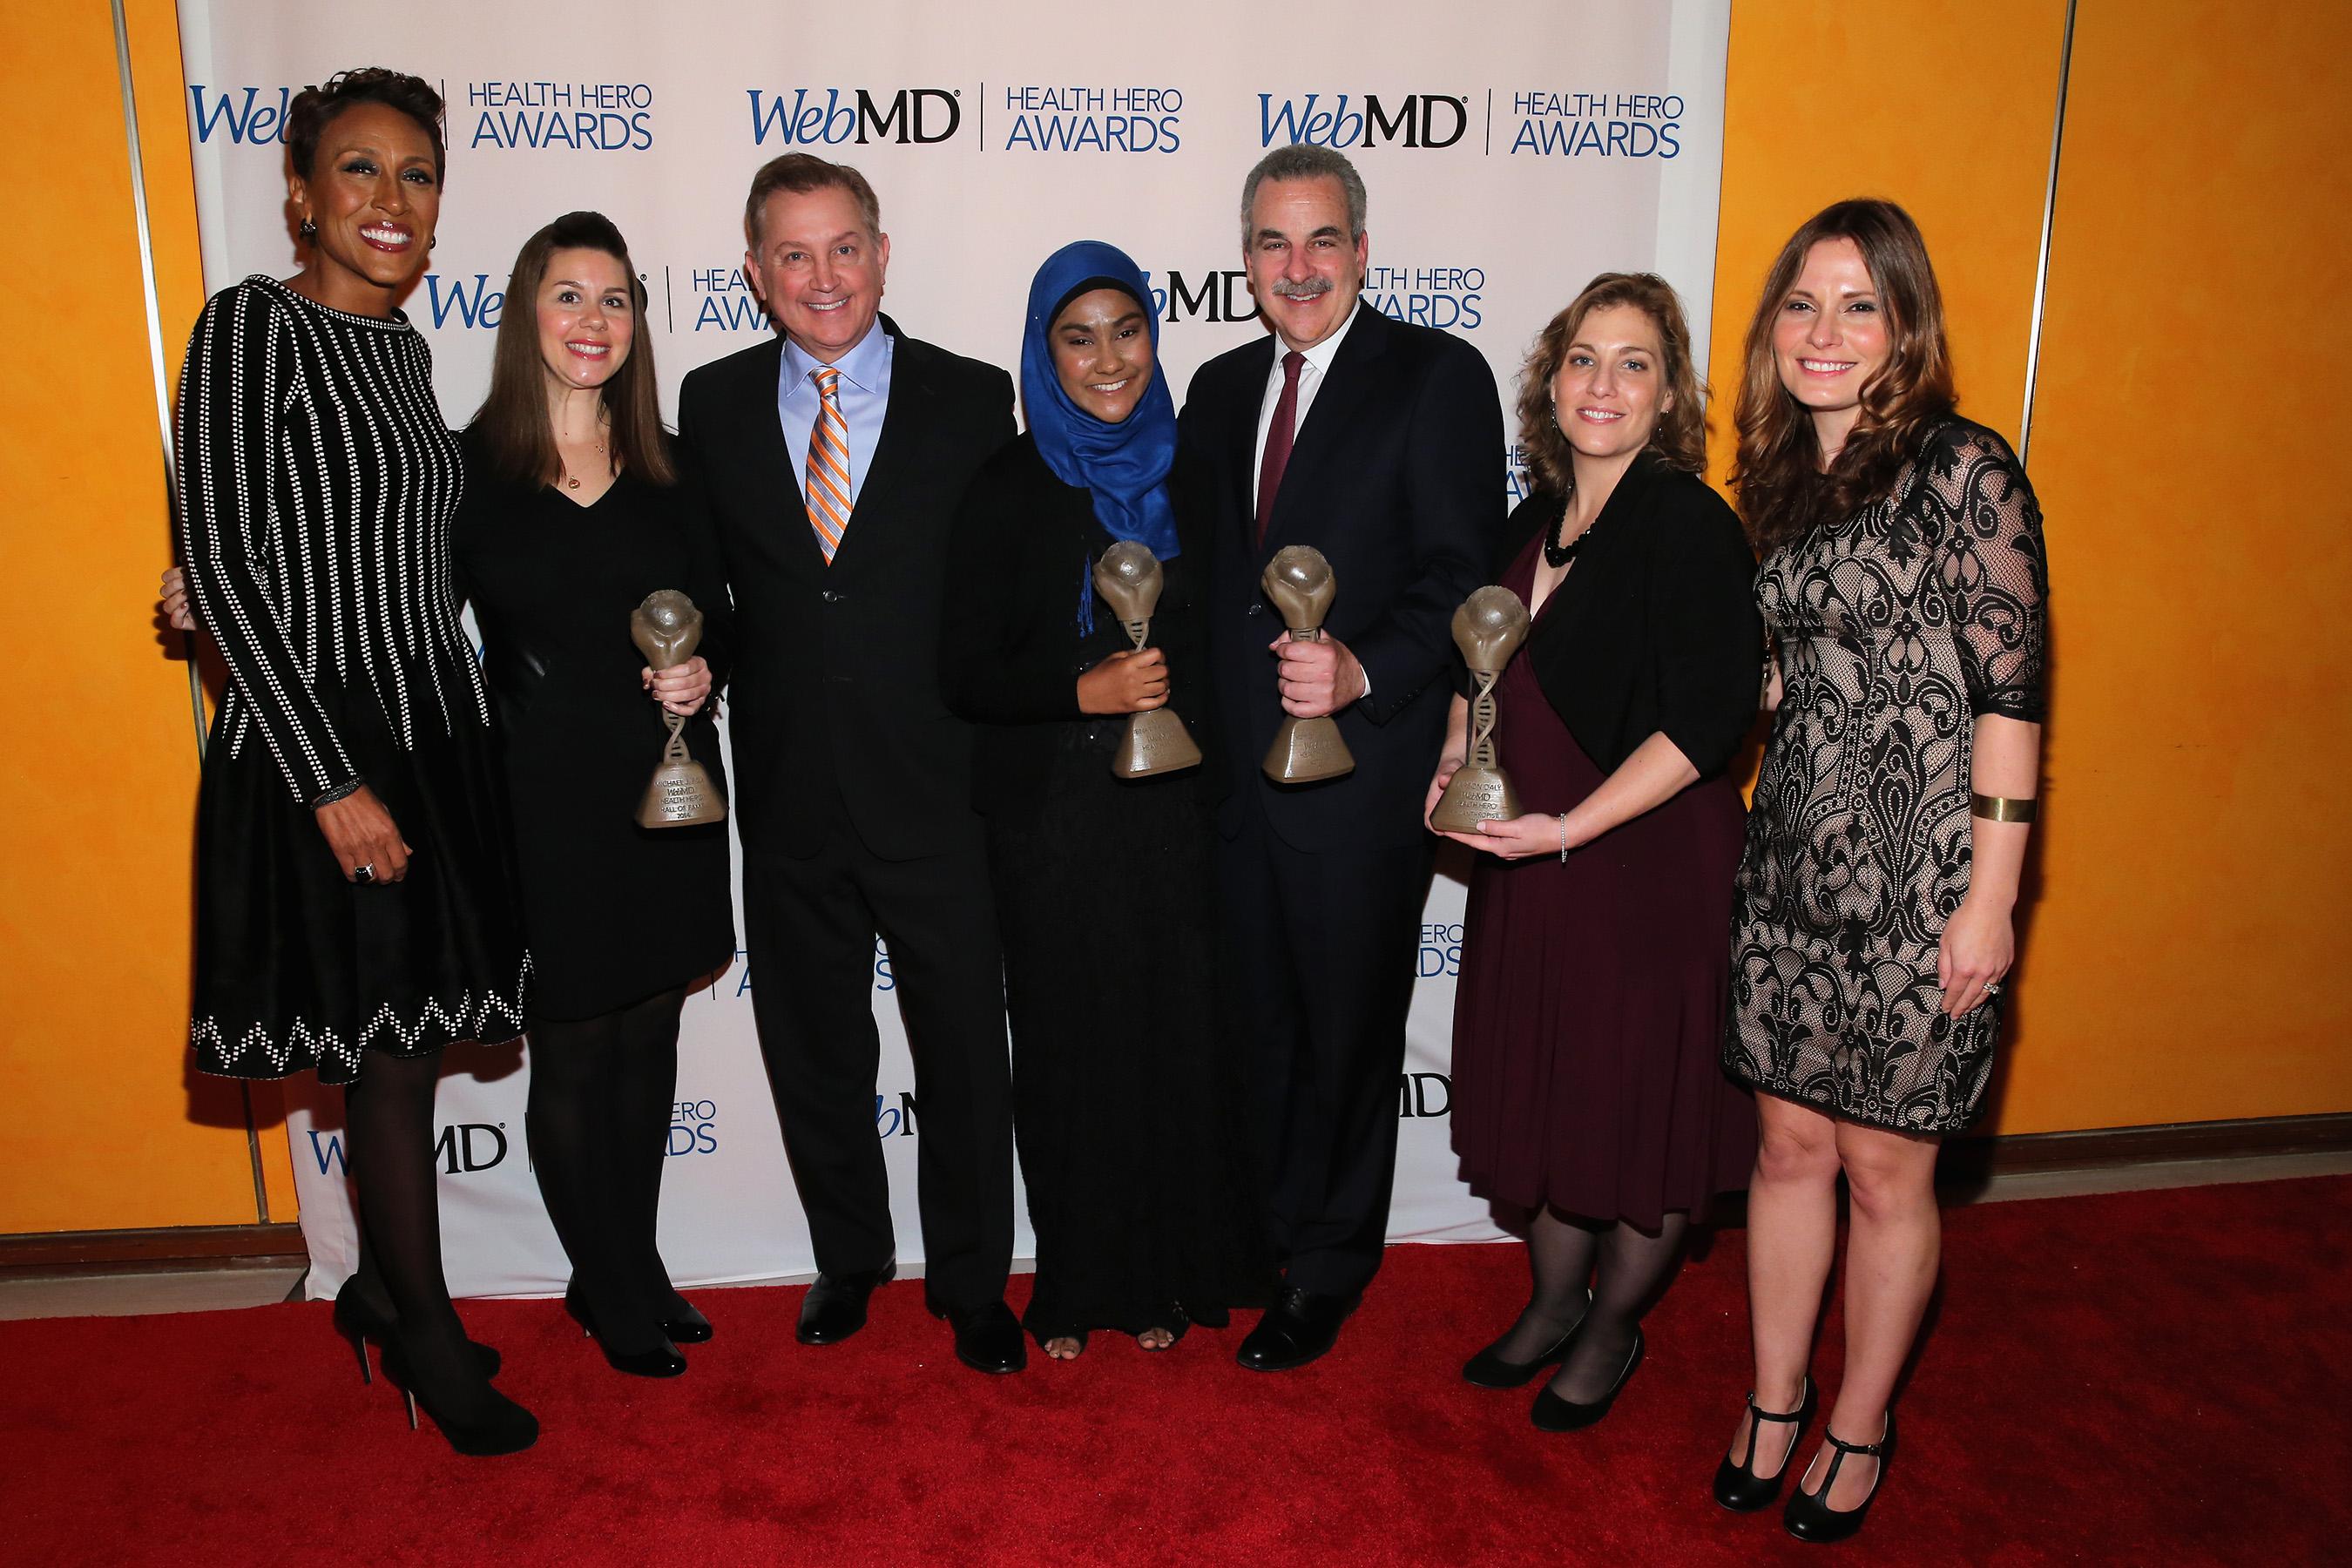 (L-R) Robin Roberts, Claire Meunier, Dr. Frank Papay, Zarin Ibnat Rahman, Dr. Harold S. Koplewicz, Jennifer Tedeschi and Julia Parker-Dickerson attend the 2014 Health Hero Awards hosted by WebMD at Times Center on November 6, 2014 in New York City. (Photo by Neilson Barnard/Getty Images)